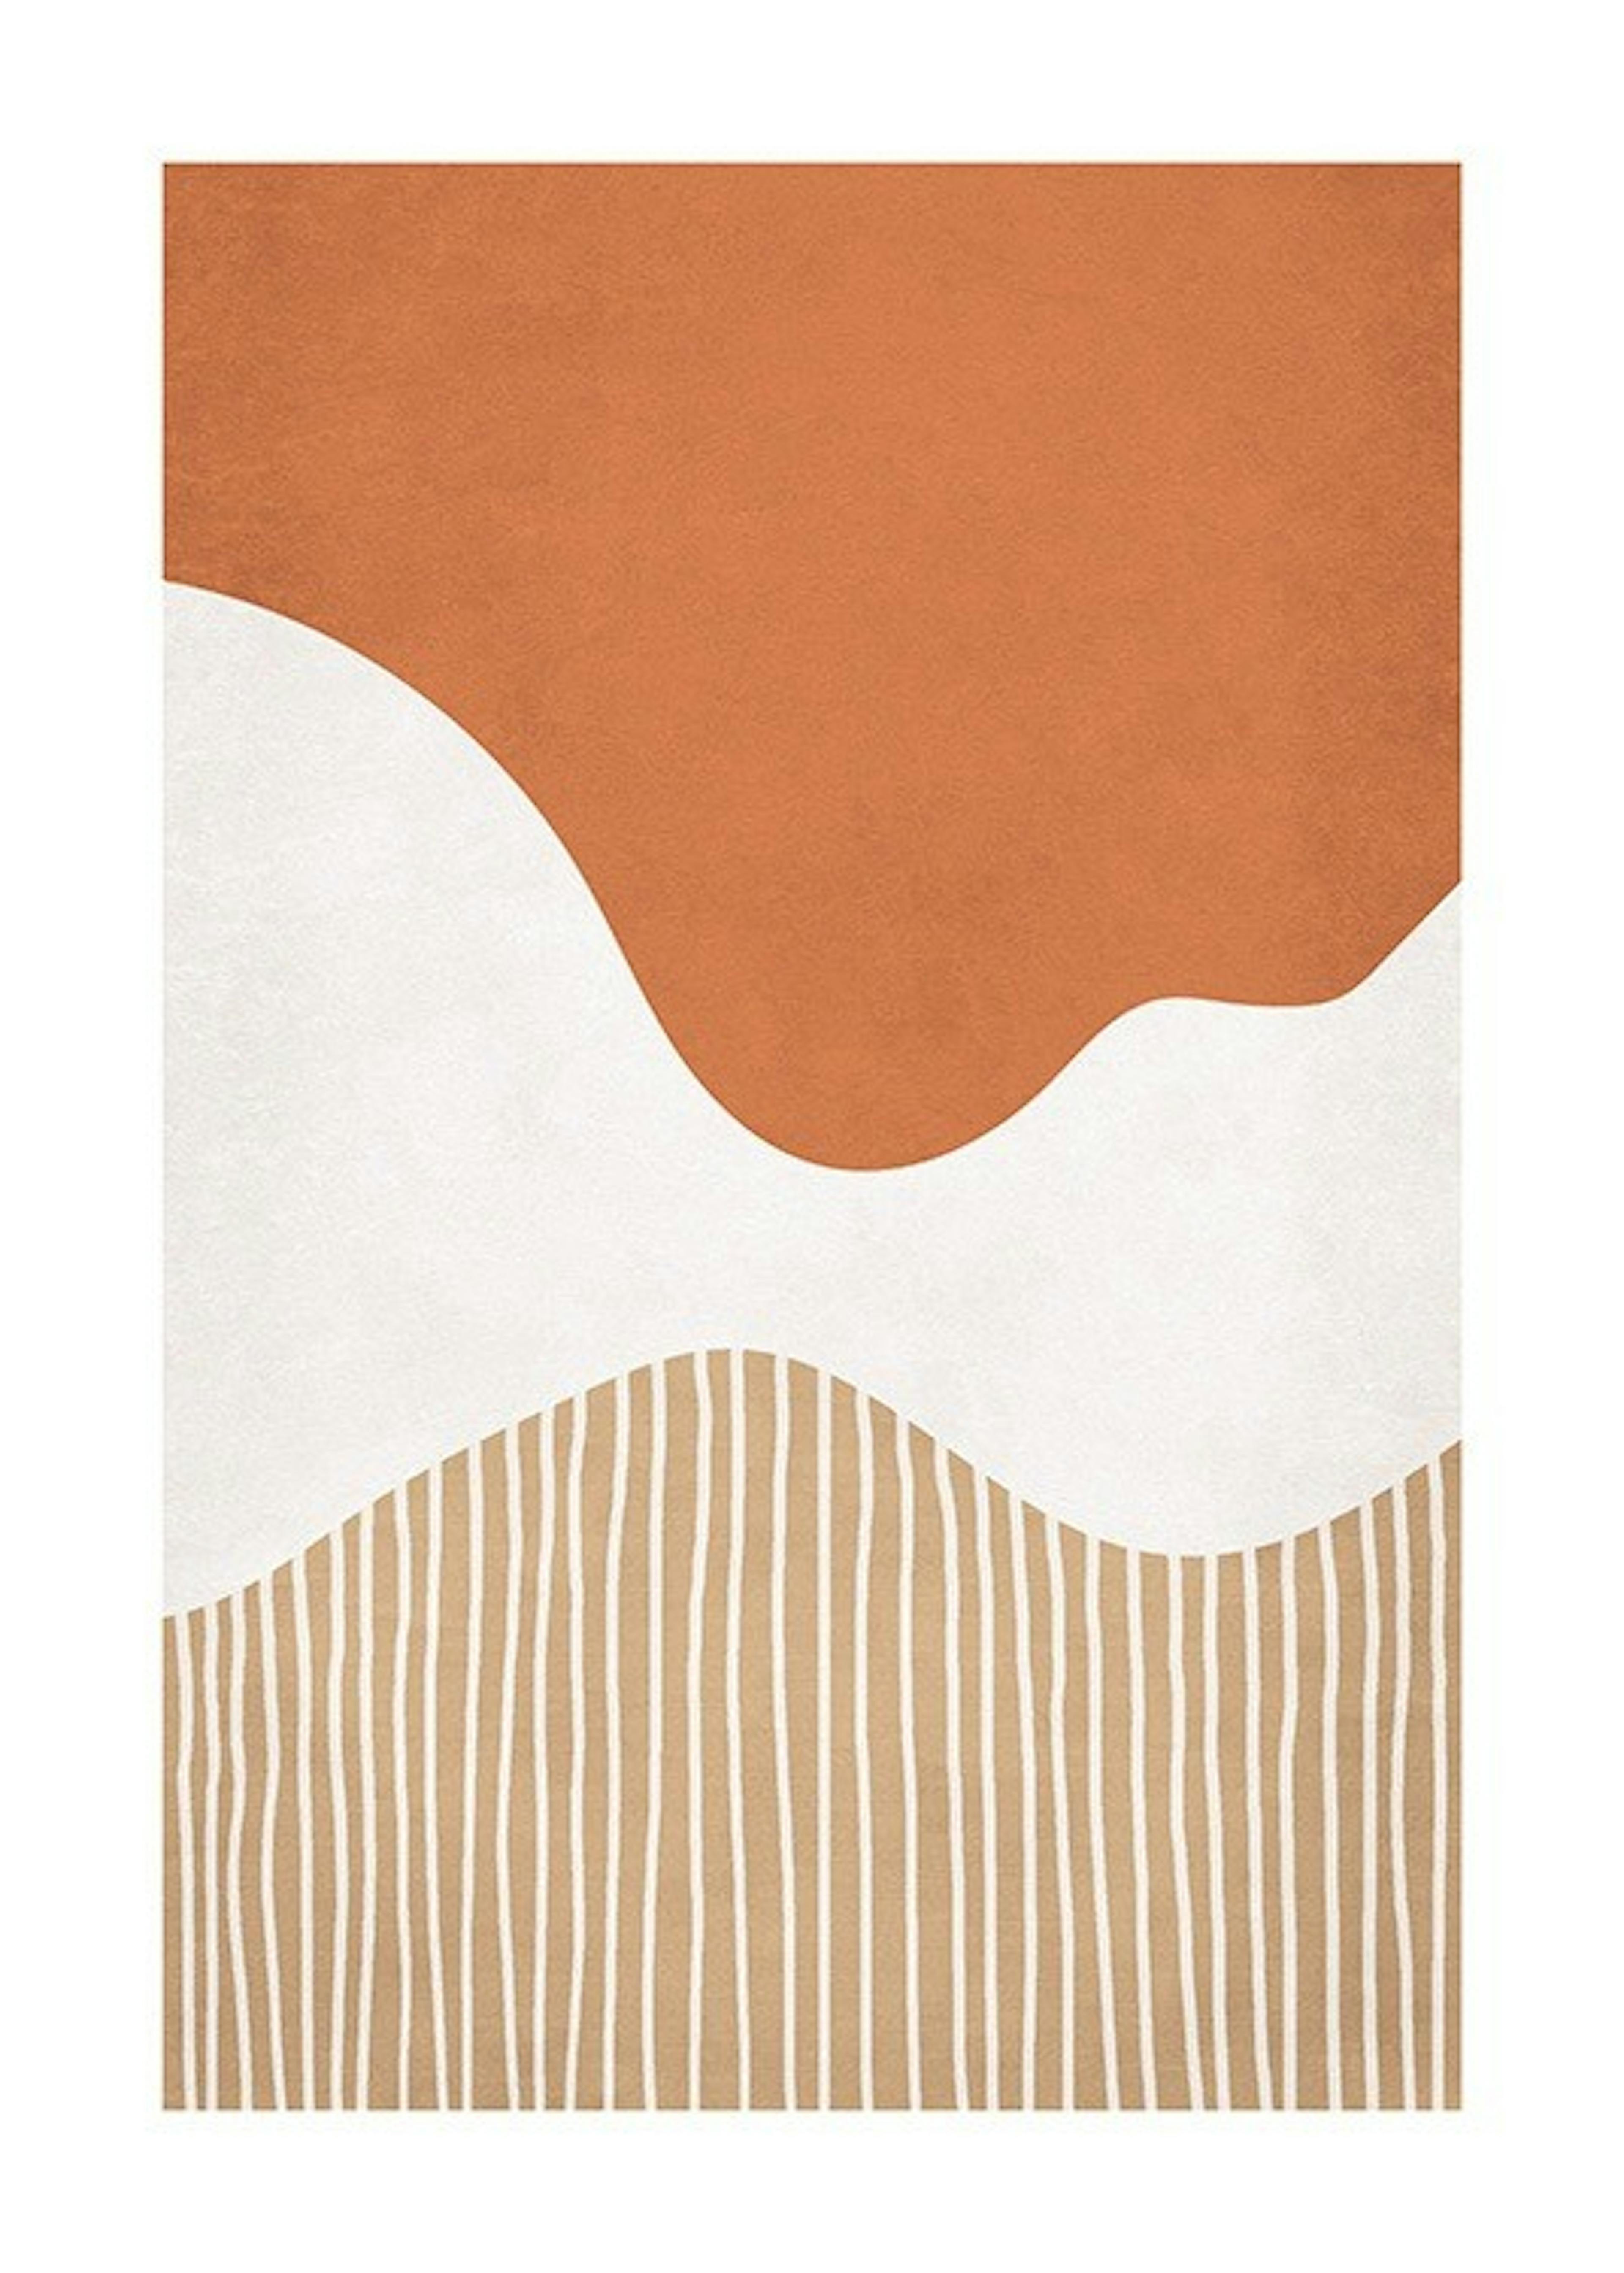 Abstract Shapes and Lines Print